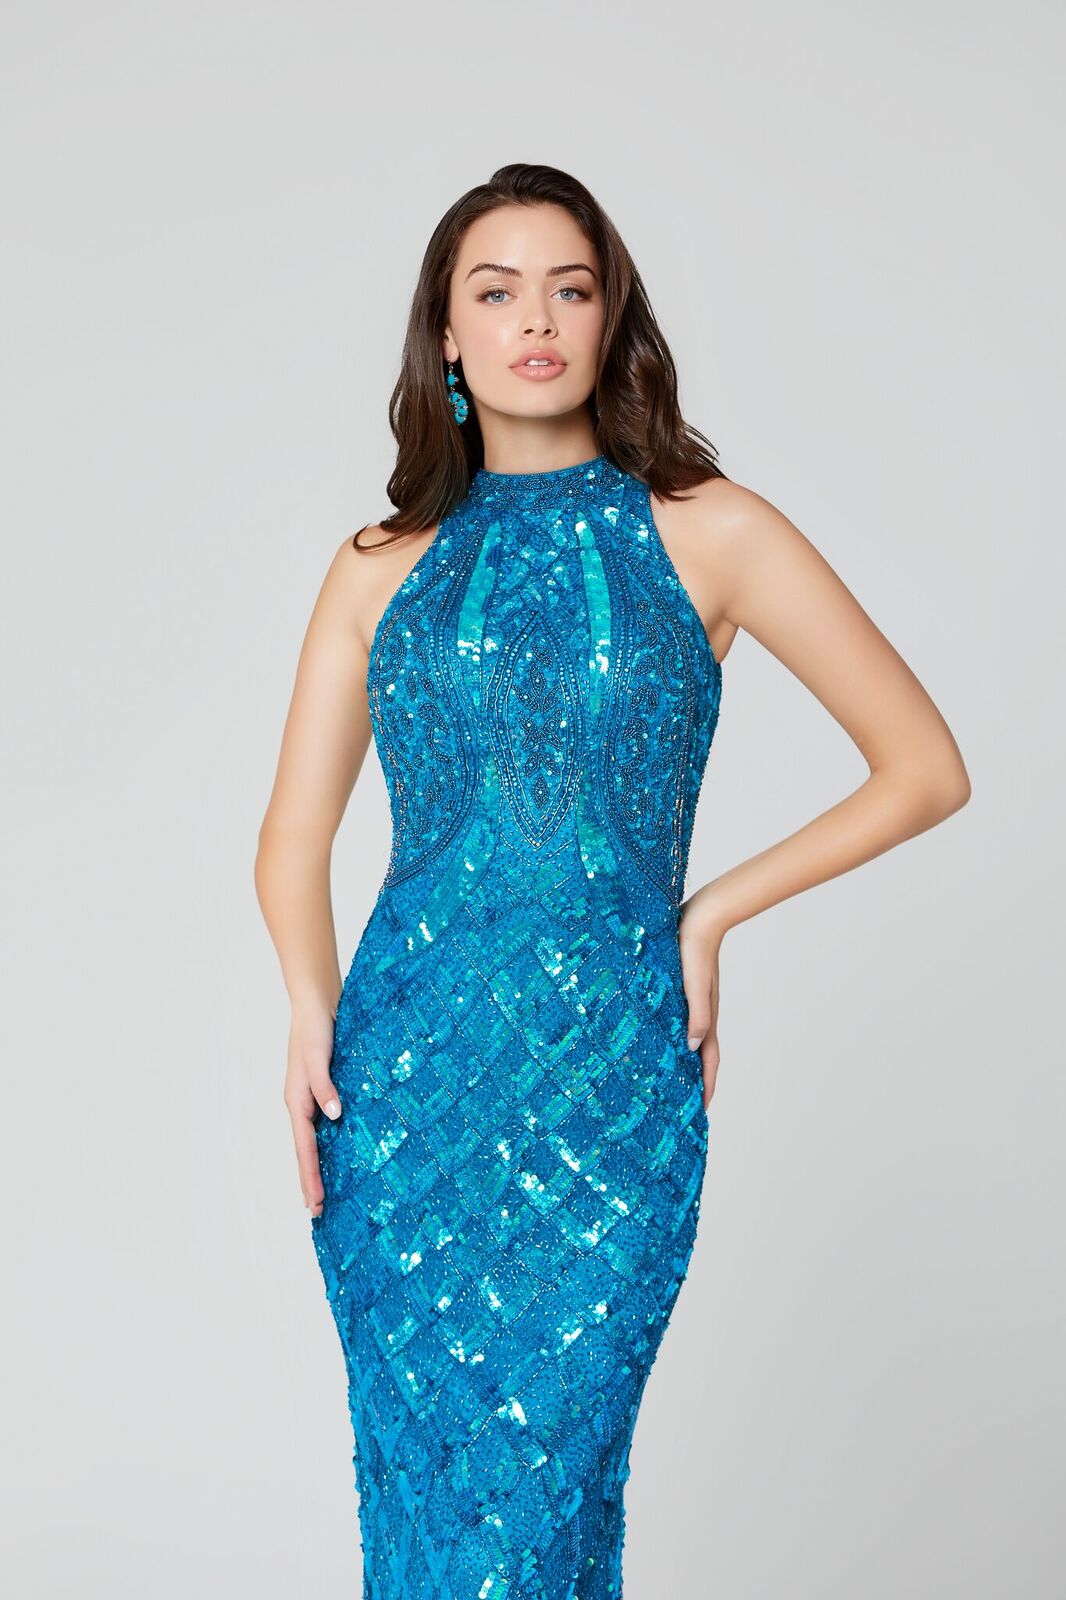 Primavera Couture 3442 high neckline and high back sleeveless fully beaded sequins evening gown.  Beaded High Neckline Prom Dress Formal Evening Gown.  Available colors:  Peacock  Available sizes:  18